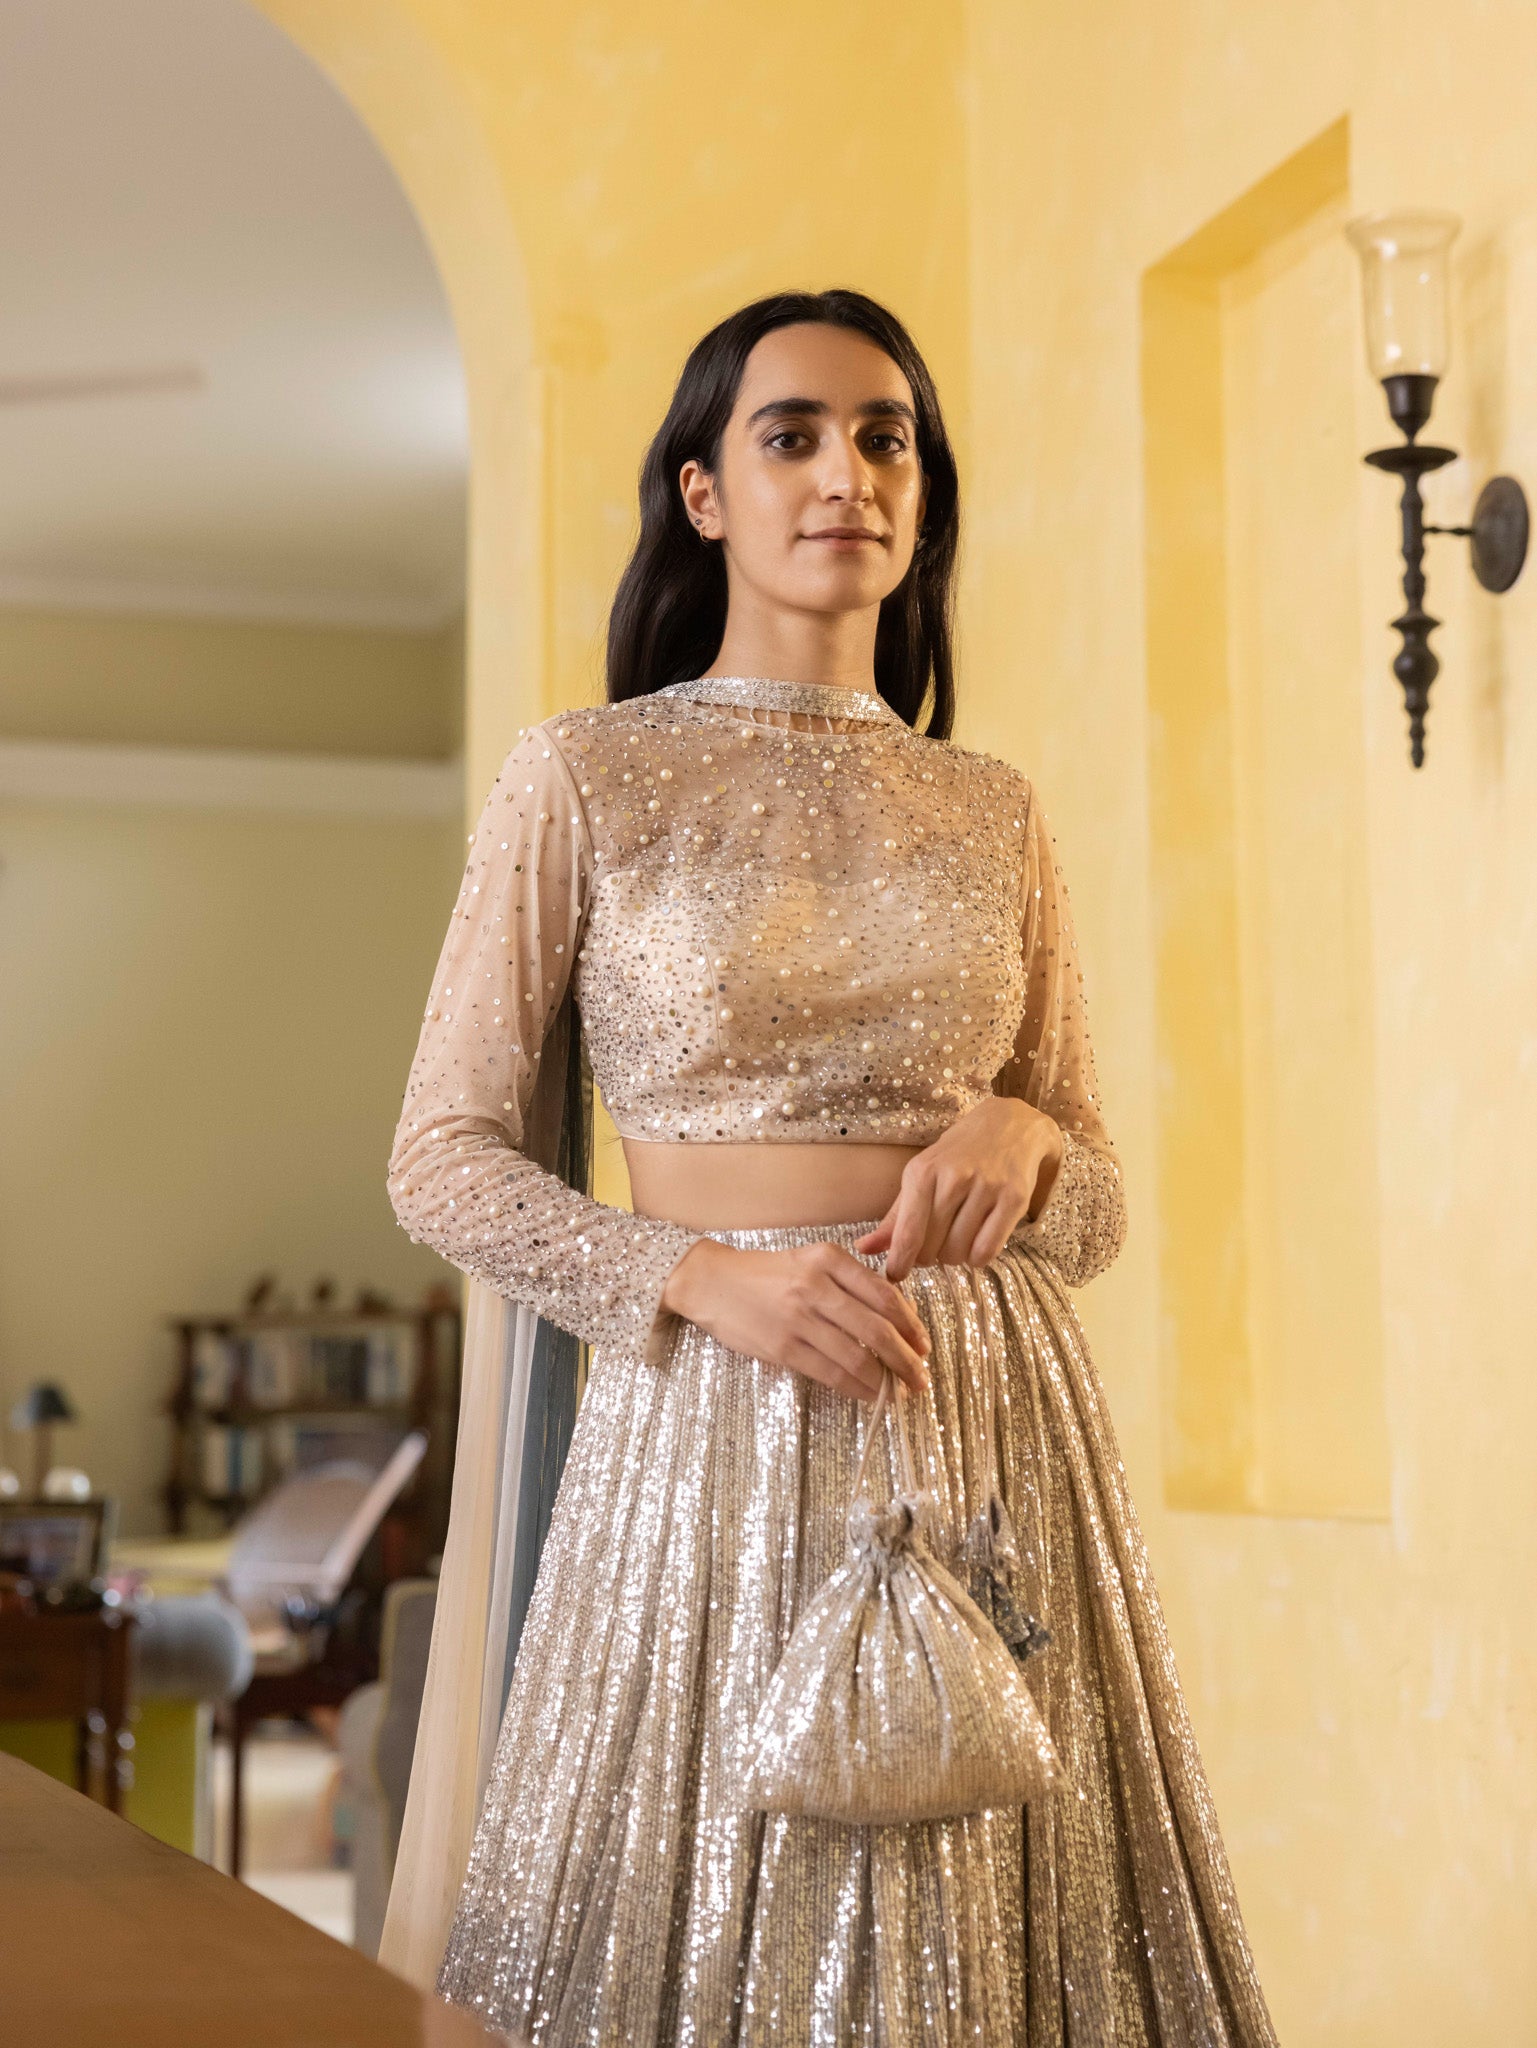 Shop this beautiful brown shimmery lehenga with a boat cut blouse and sheer long sleeves Dazzle on weddings and special occasions with exquisite Indian designer dresses, sharara suits, Anarkali suits, bridal lehengas, sharara suits from Pure Elegance Indian clothing store in USA.